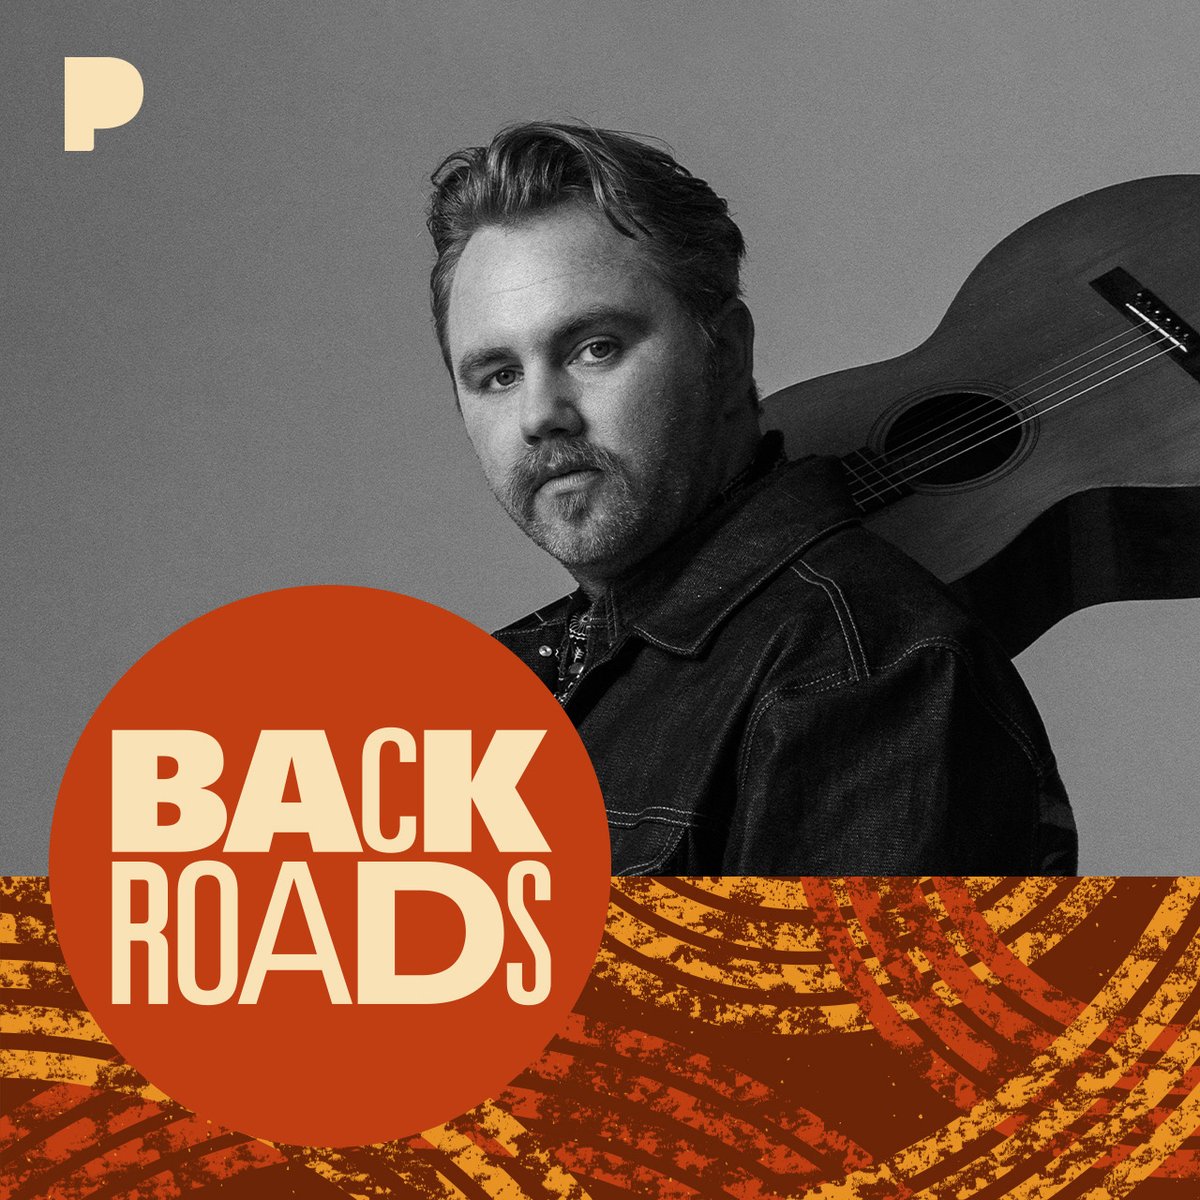 Appreciate the support @pandoramusic 🩵 #NashvilleTennessee Y'all can hear 'Would If I Could' ft. @laineywilson on Backroads: pandora.com/genre/backroads